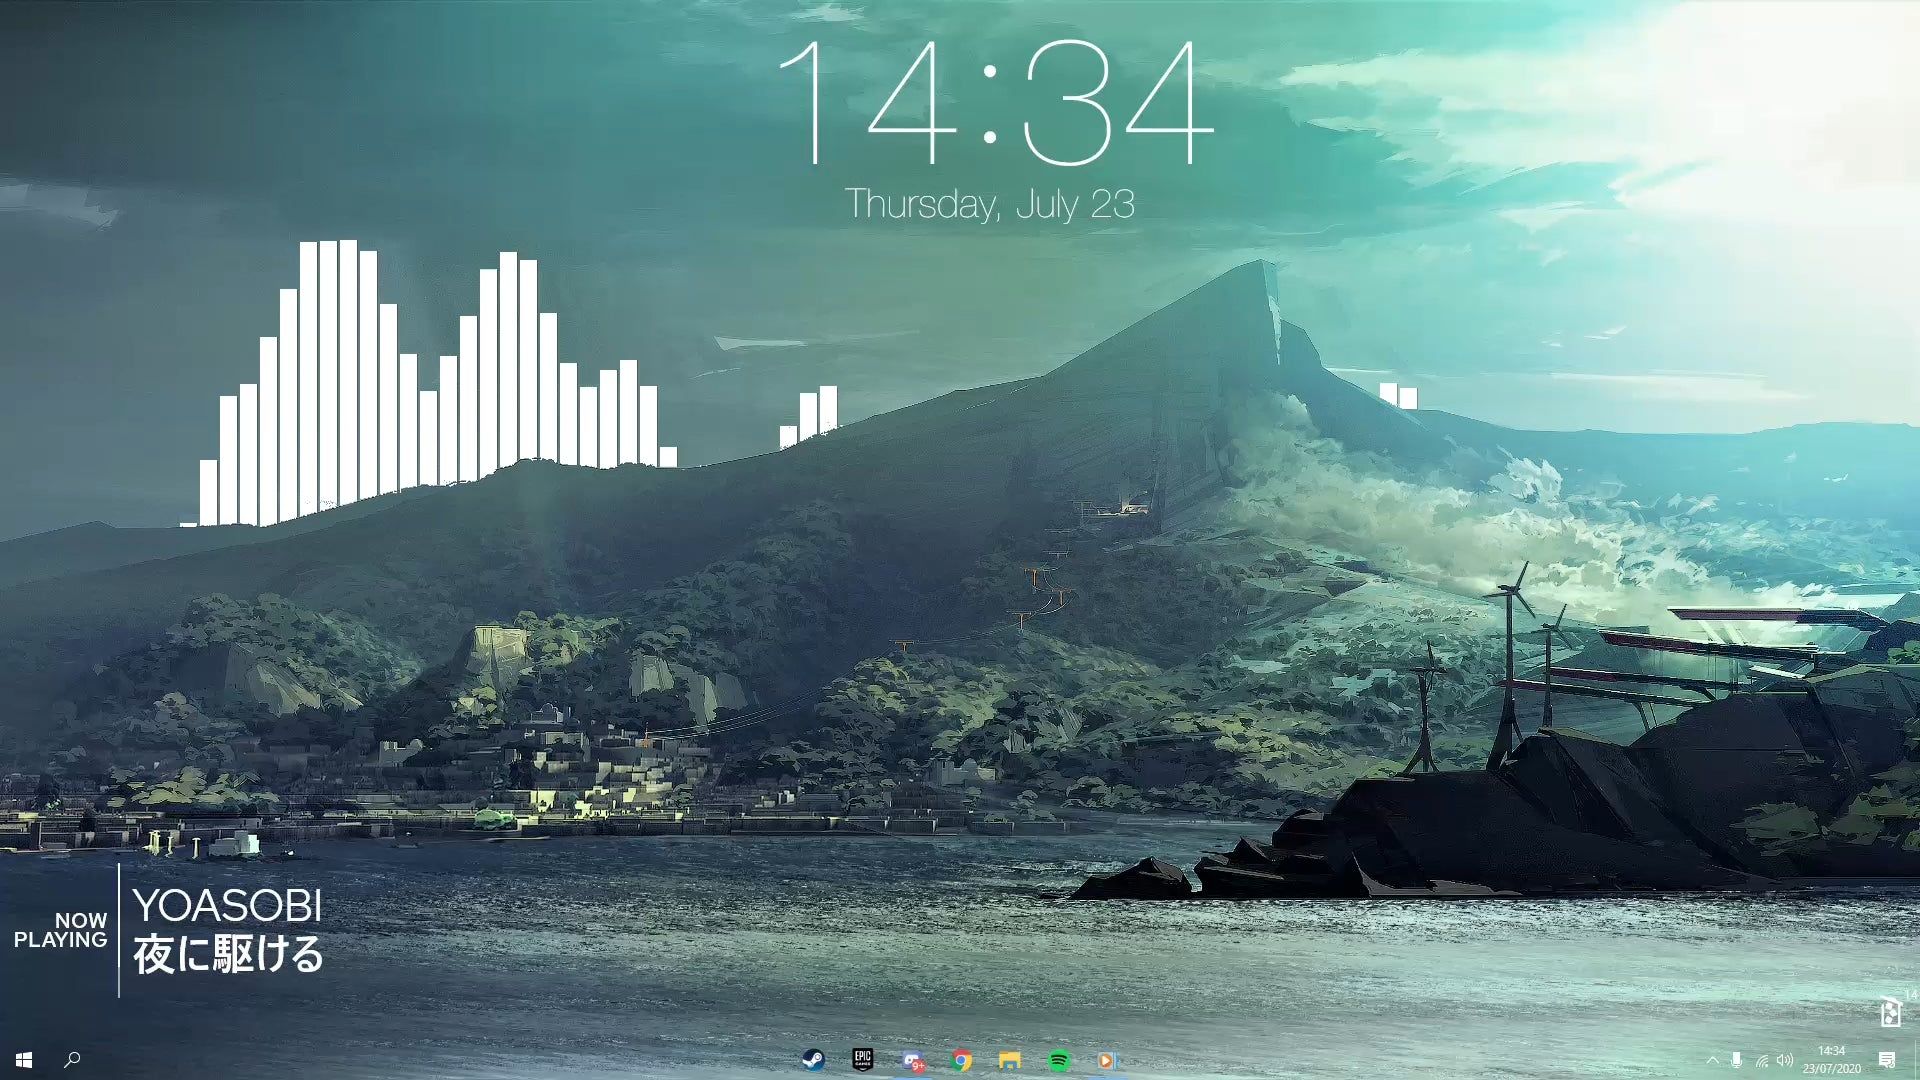 first time making a minimalistic desktop with rainmeter and wallpaper engine, hope you like it